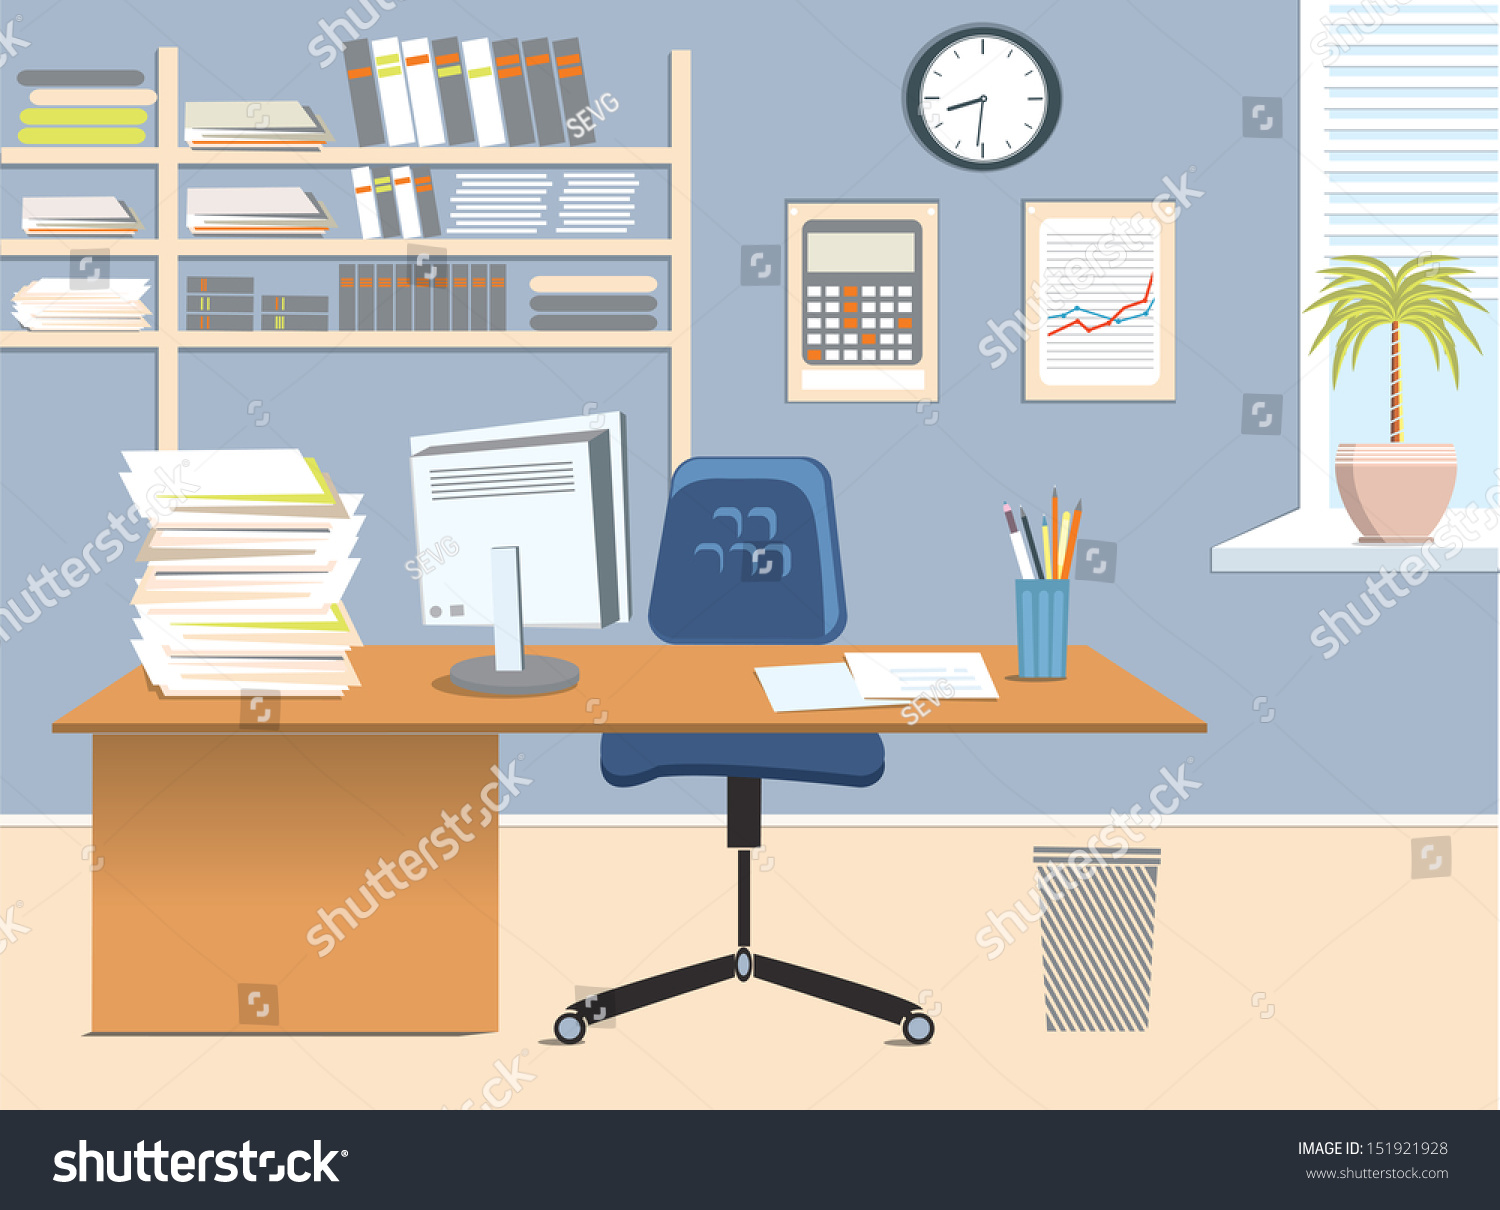 office clipart database - photo #30